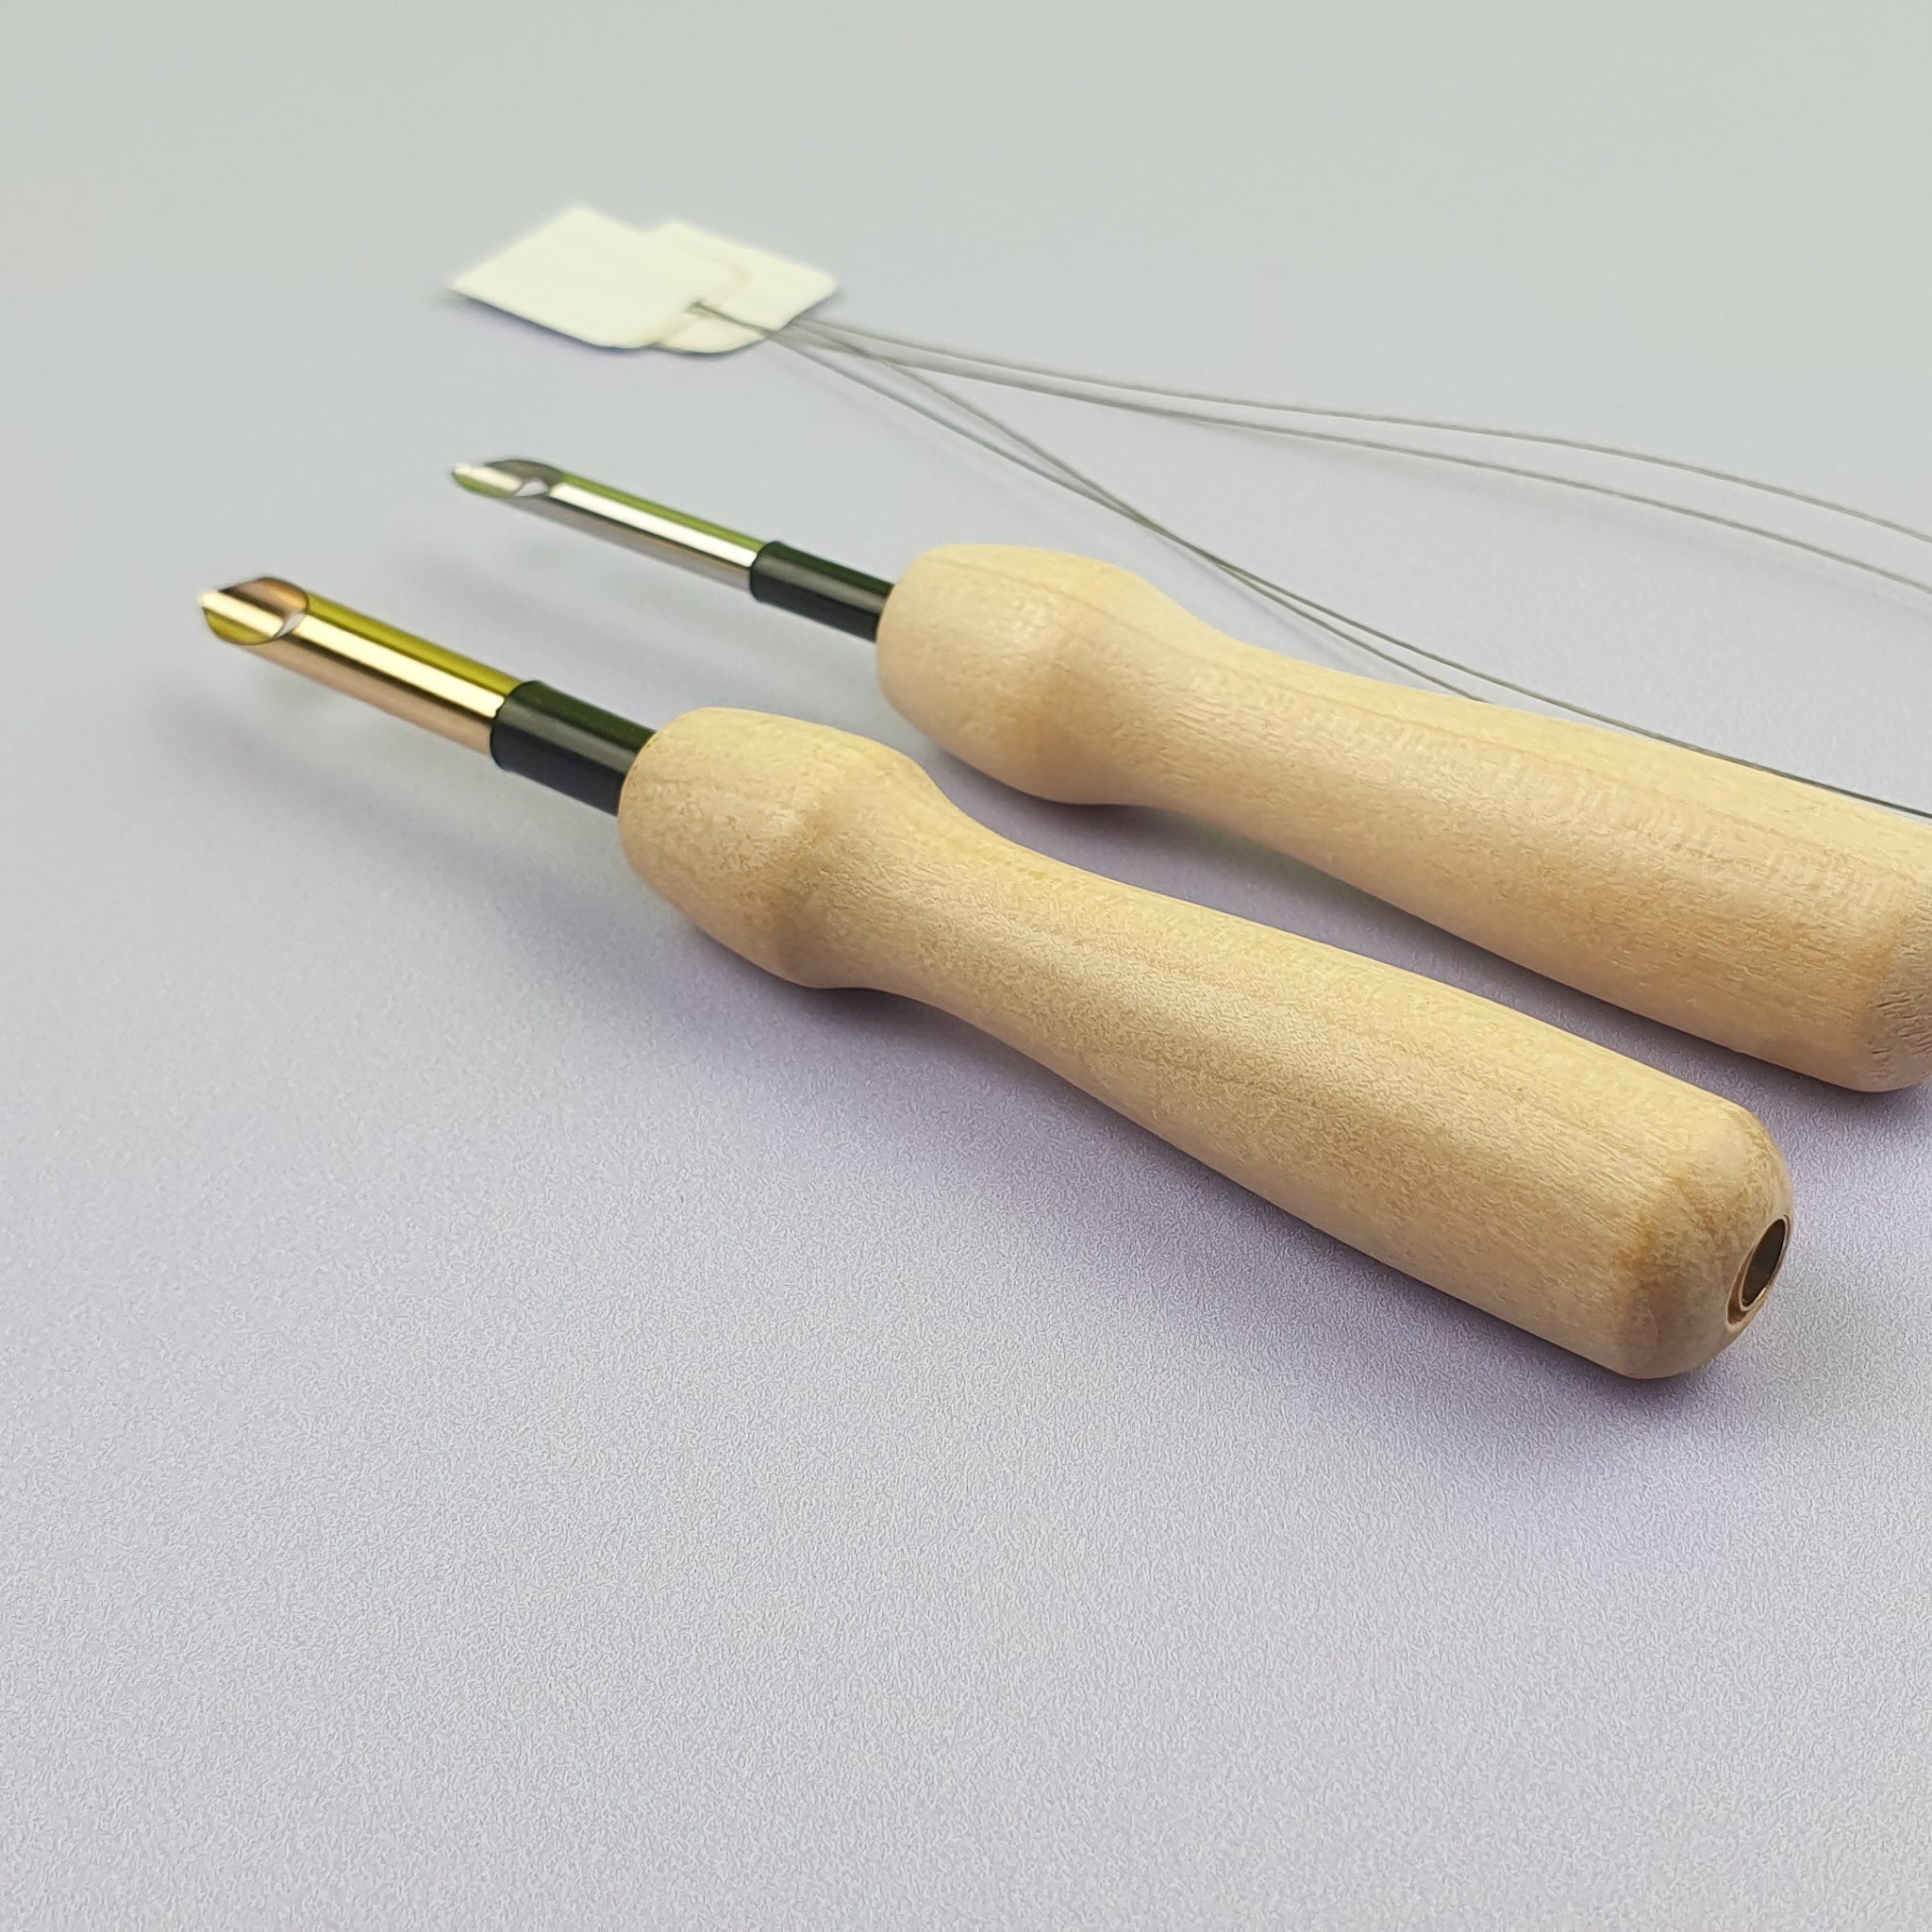 Wooden Punch Needles and Threaders